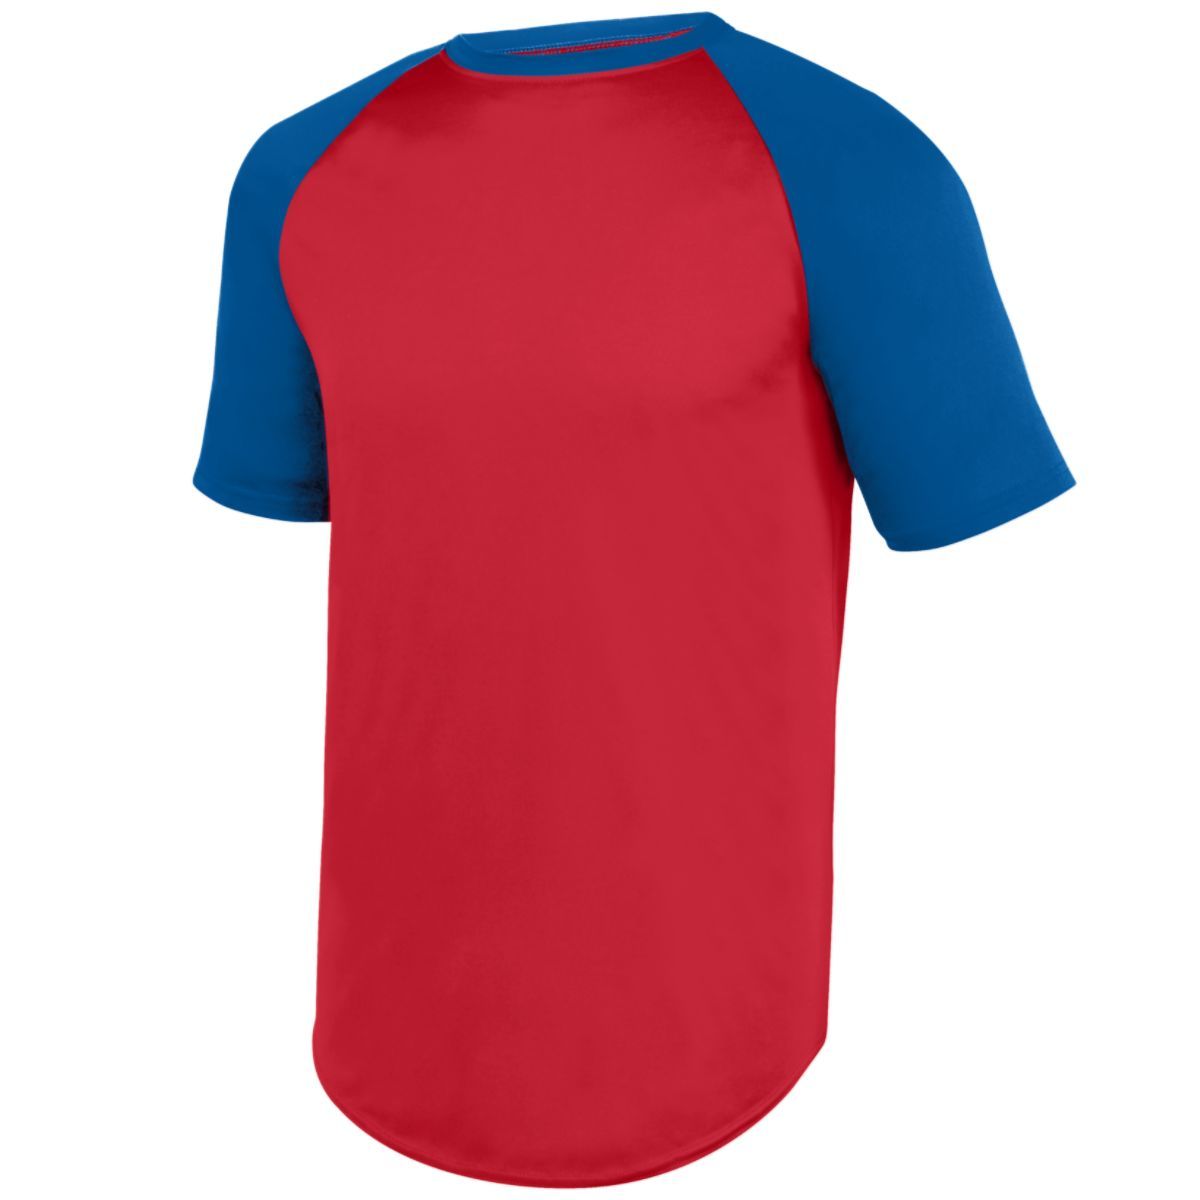 Augusta Sportswear Wicking Short Sleeve Baseball Jersey in Red/Royal  -Part of the Adult, Adult-Jersey, Augusta-Products, Baseball, Shirts, All-Sports, All-Sports-1 product lines at KanaleyCreations.com